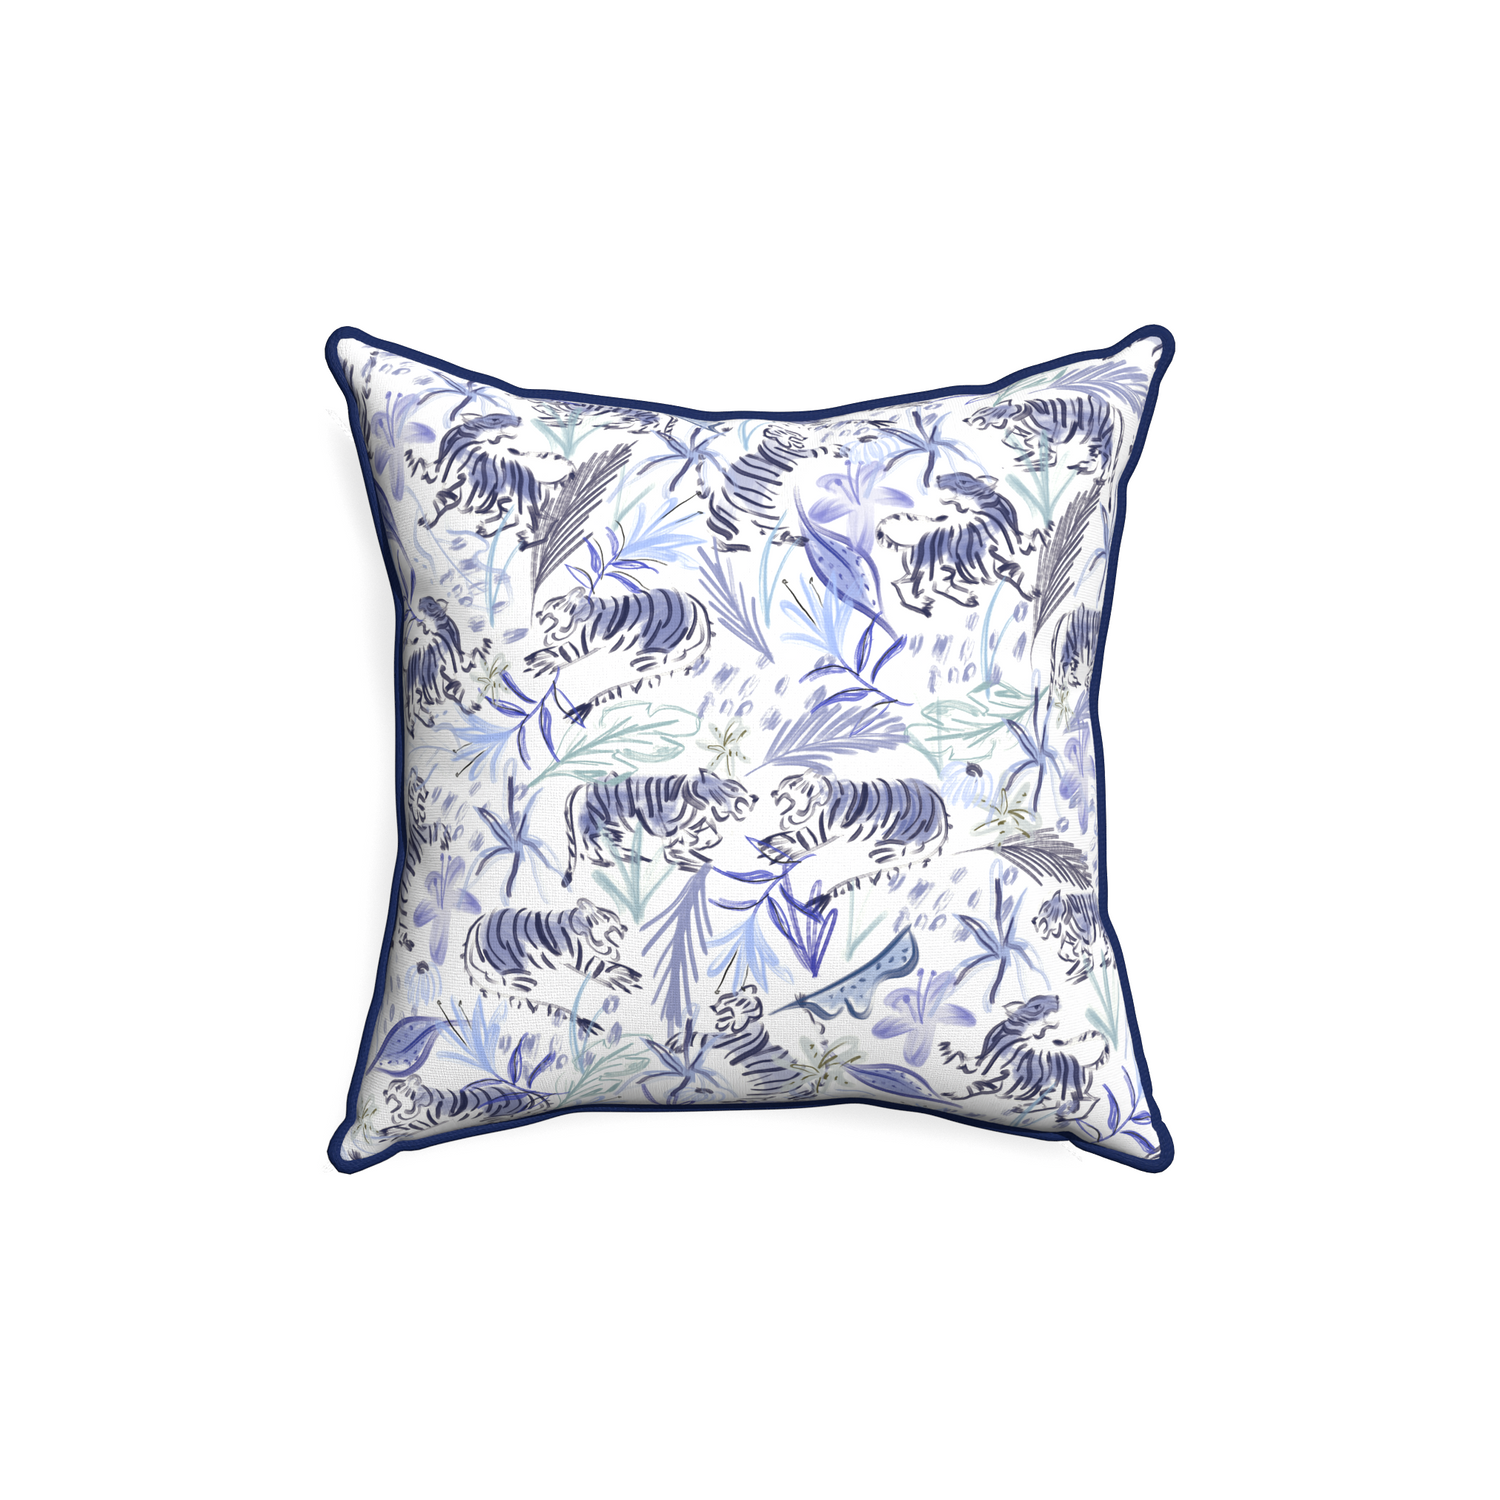 18-square frida blue custom blue with intricate tiger designpillow with midnight piping on white background